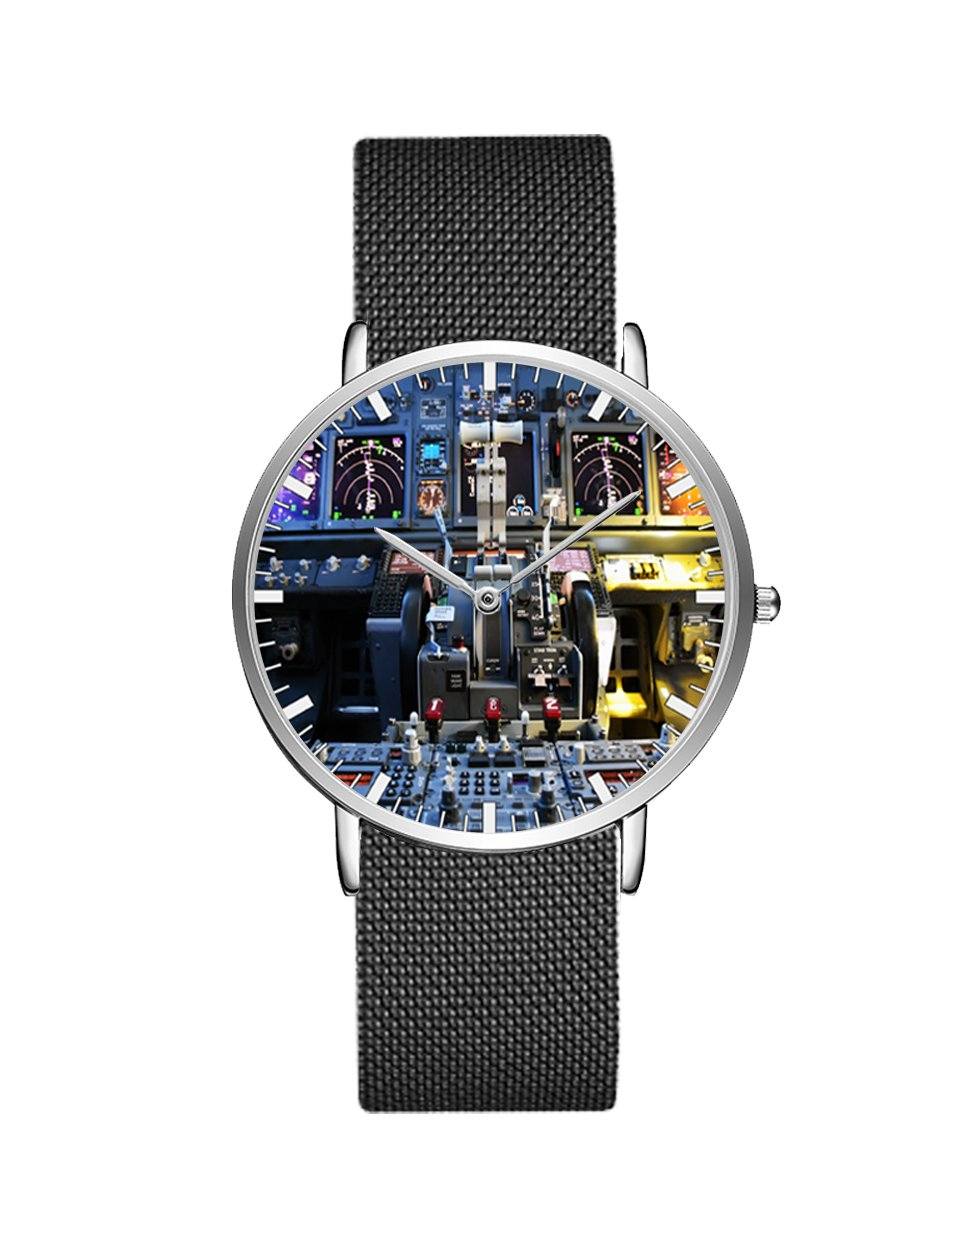 Boeing 737 Cockpit Designed Stainless Steel Strap Watches Pilot Eyes Store Silver & Black Stainless Steel Strap 